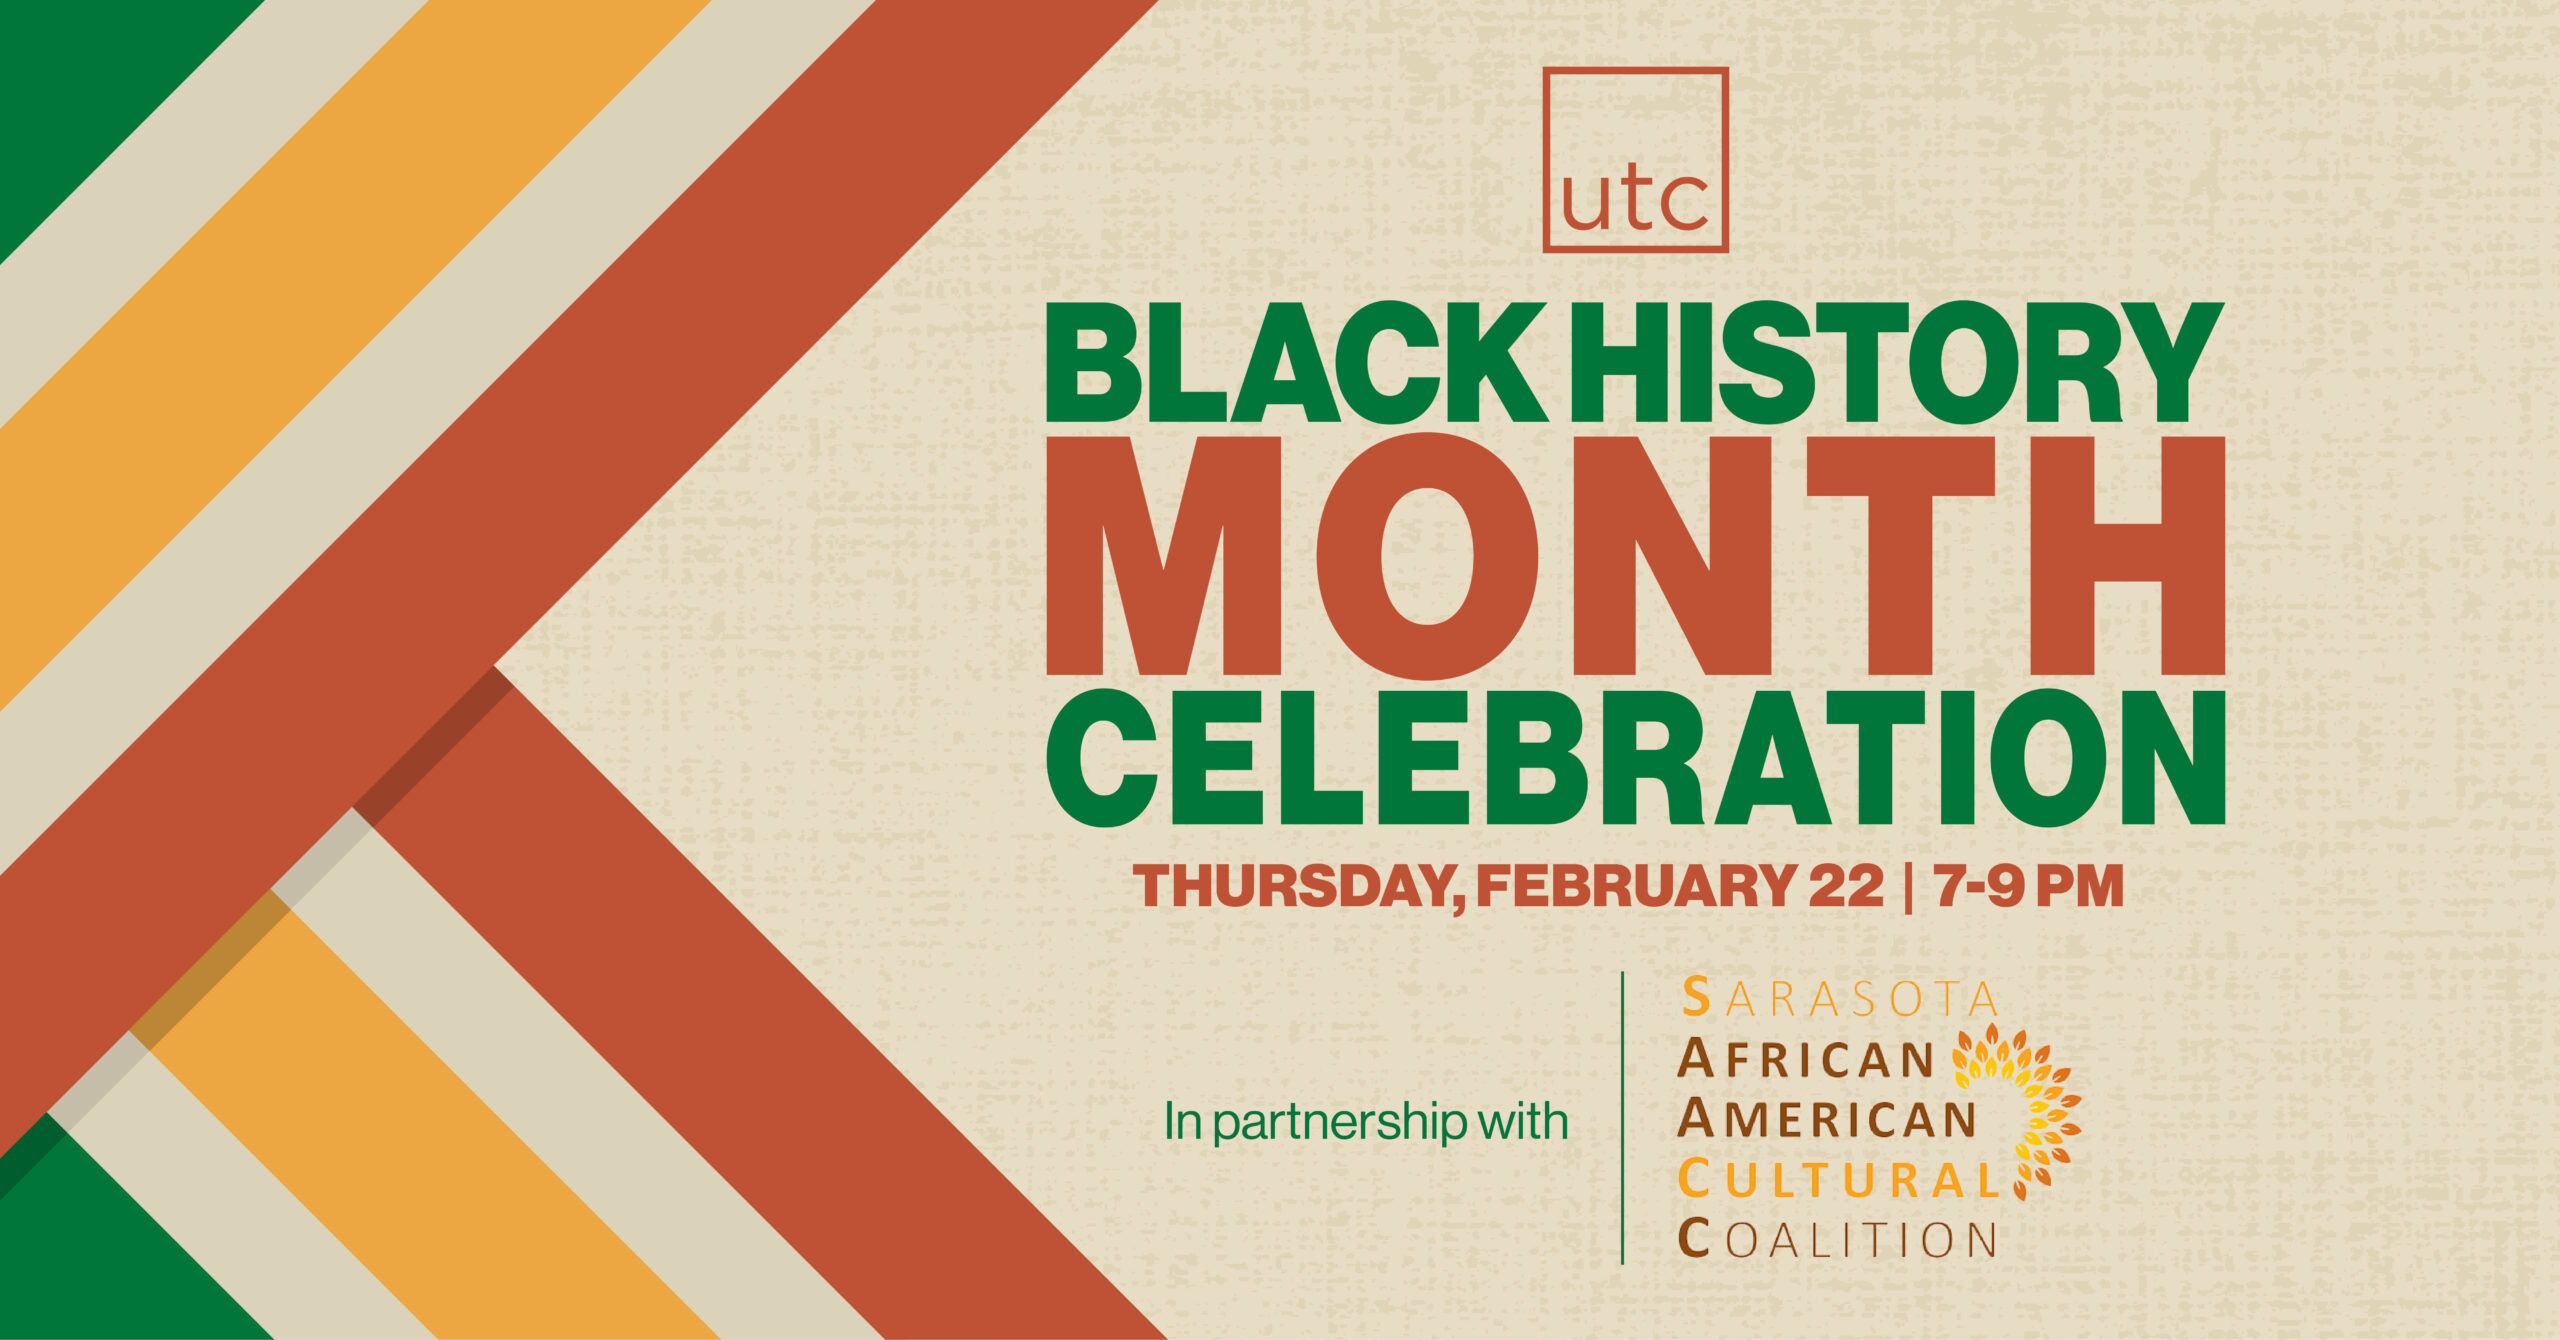 Why is Black History Month celebrated and why is it in February?